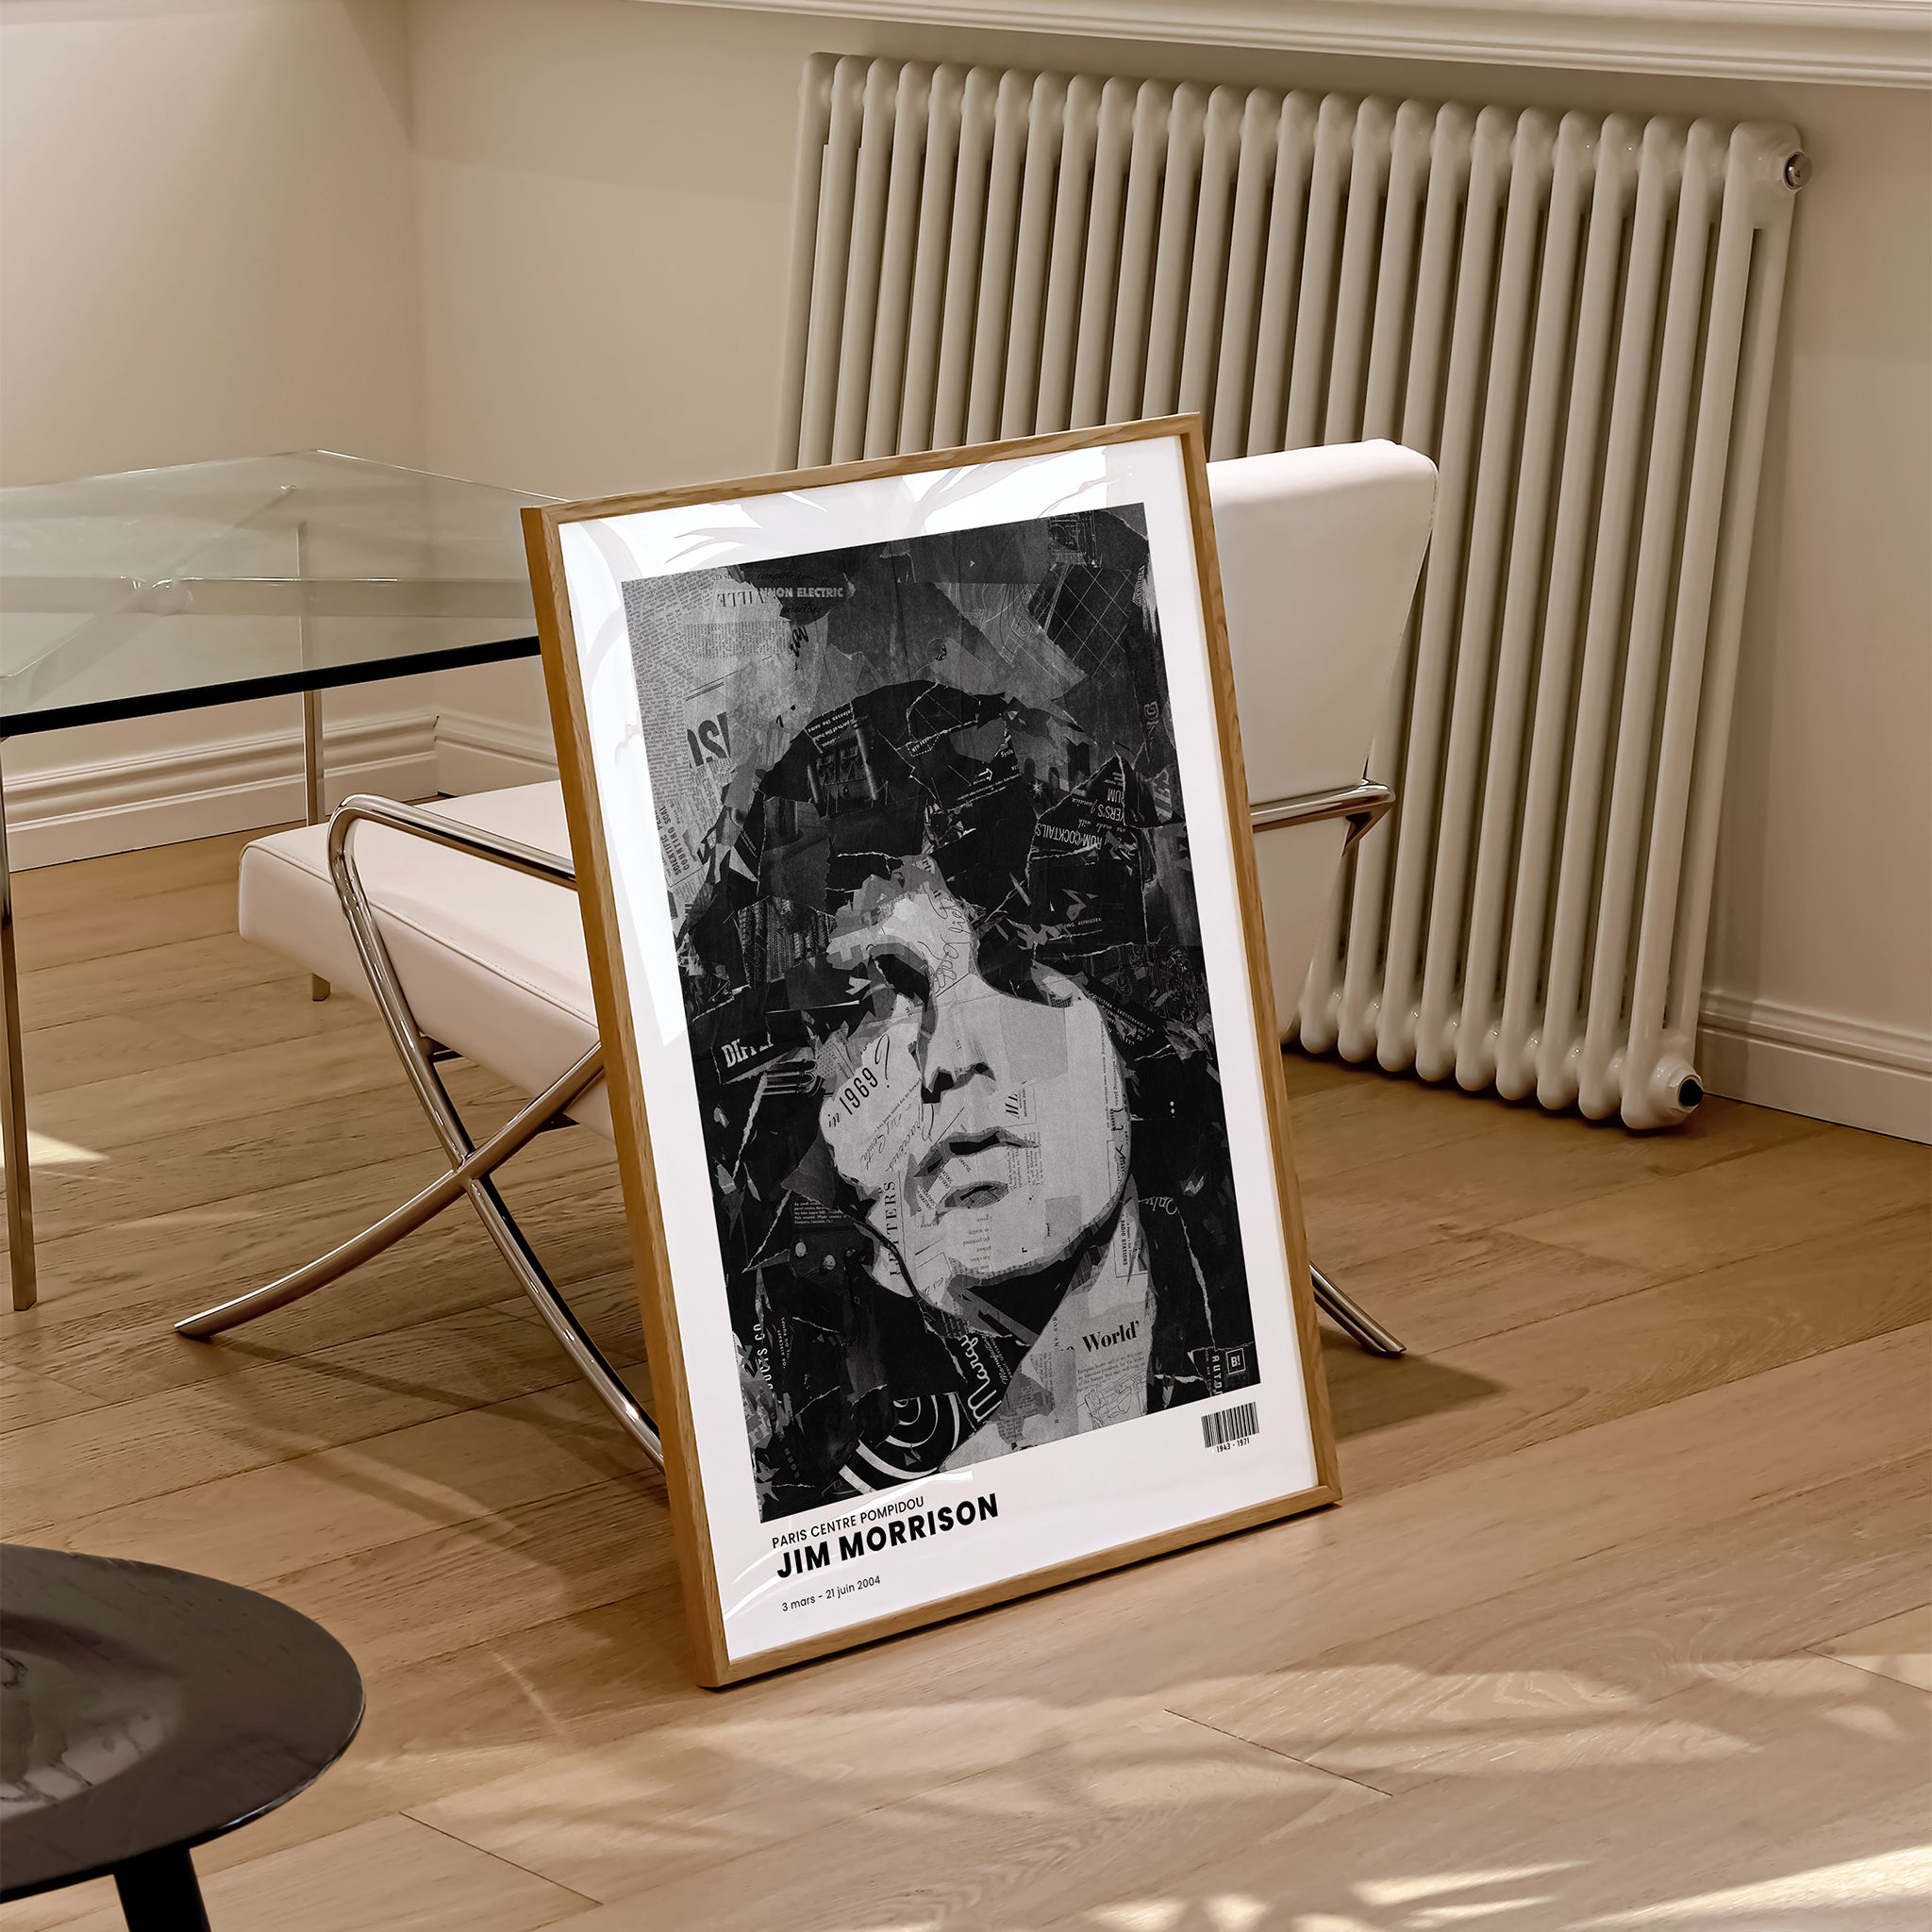 Be inspired by Iconic Jim Morrison Paris Centre Pompidou Exhibition Art Print. The artwork is presented in a natural wood frame that captures its timeless beauty in every detail.